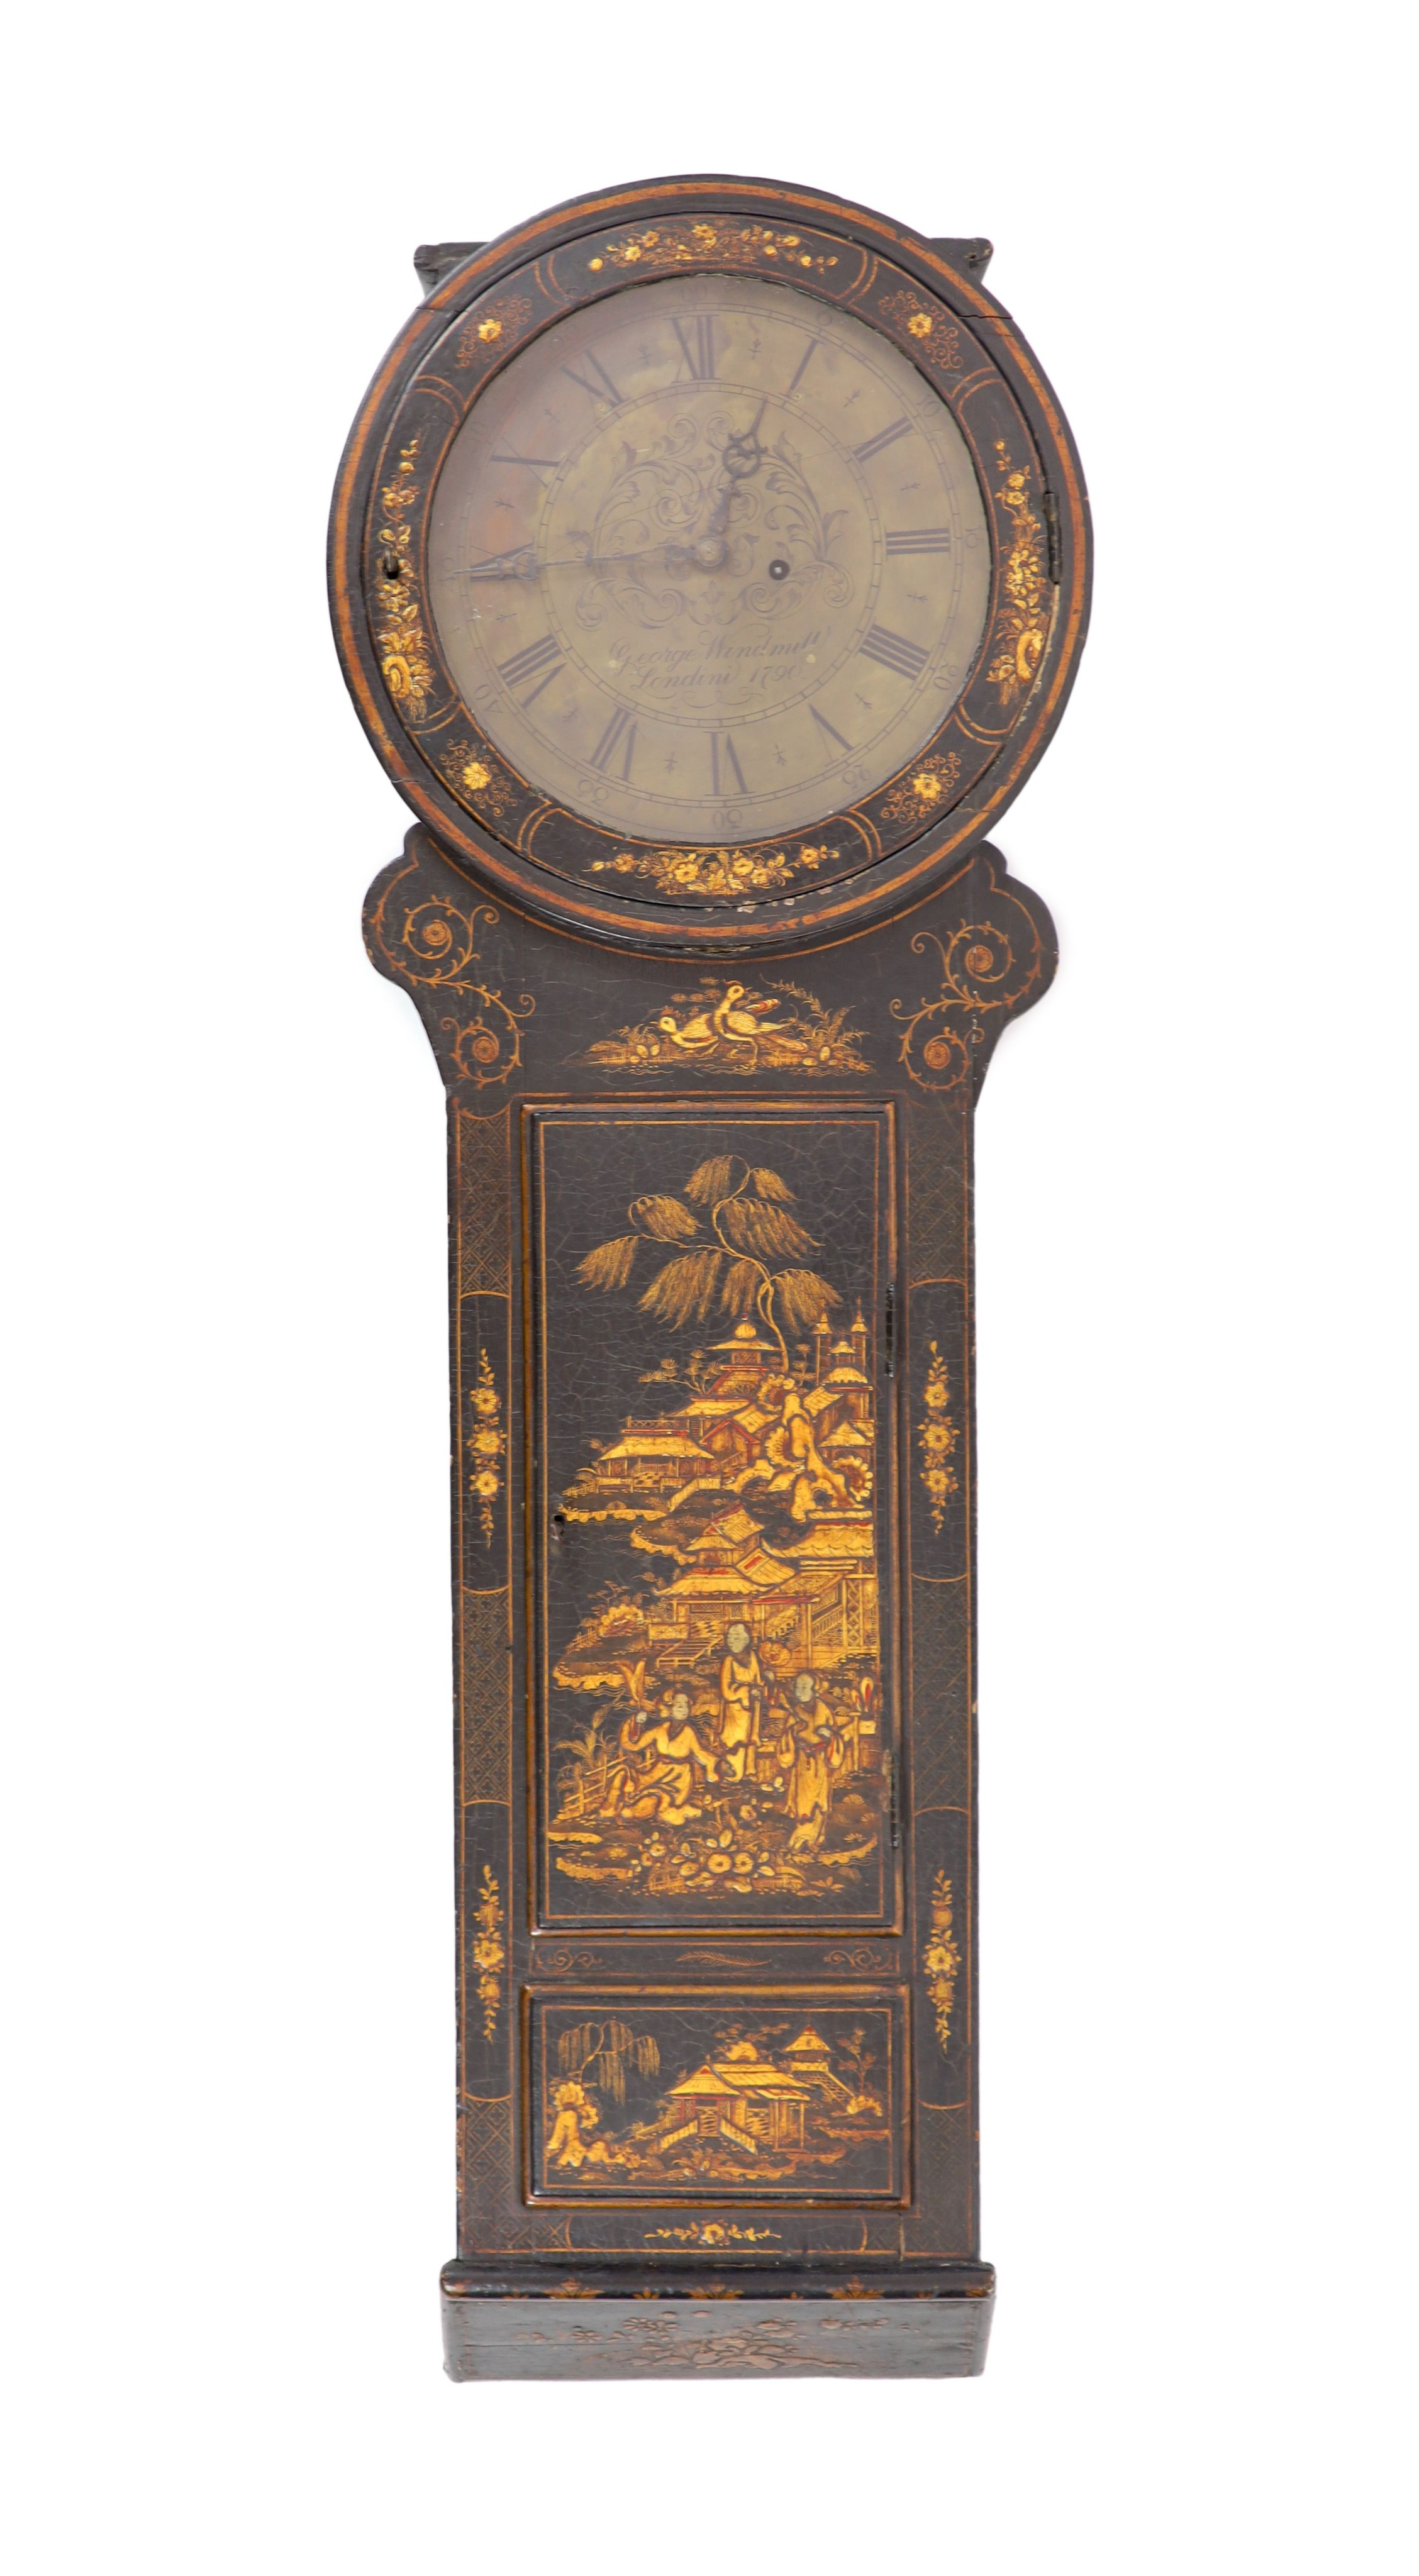 George Windmill of London, 1790. A George III japanned dropdial wall clock, diameter 46cm height 136cm                                                                                                                      